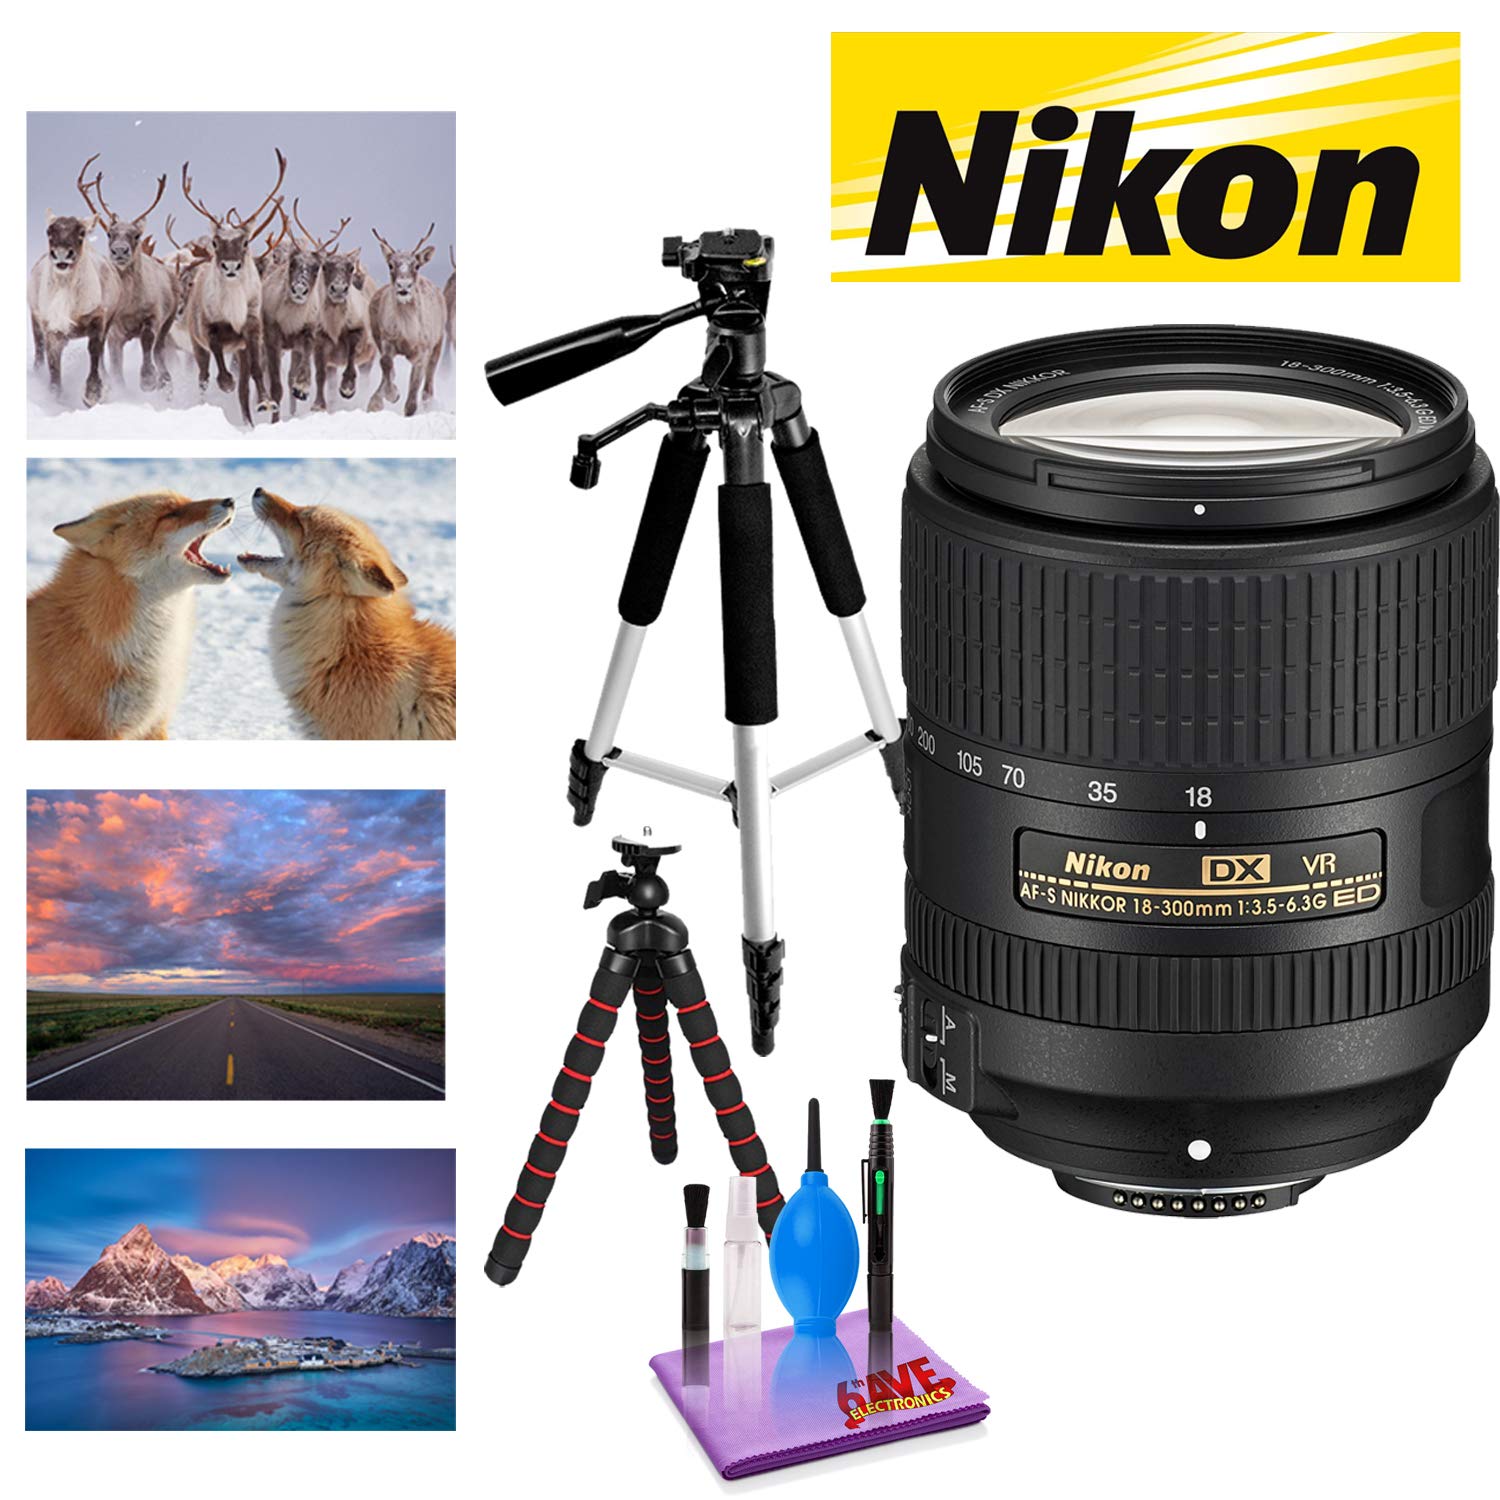 NIKON 18-300MM F/3.5-6.3G ED AF-S DX VR Lens with 12 in Flexible Tripod and 72 in Professional Heavy Aluminum Tripod Bundle